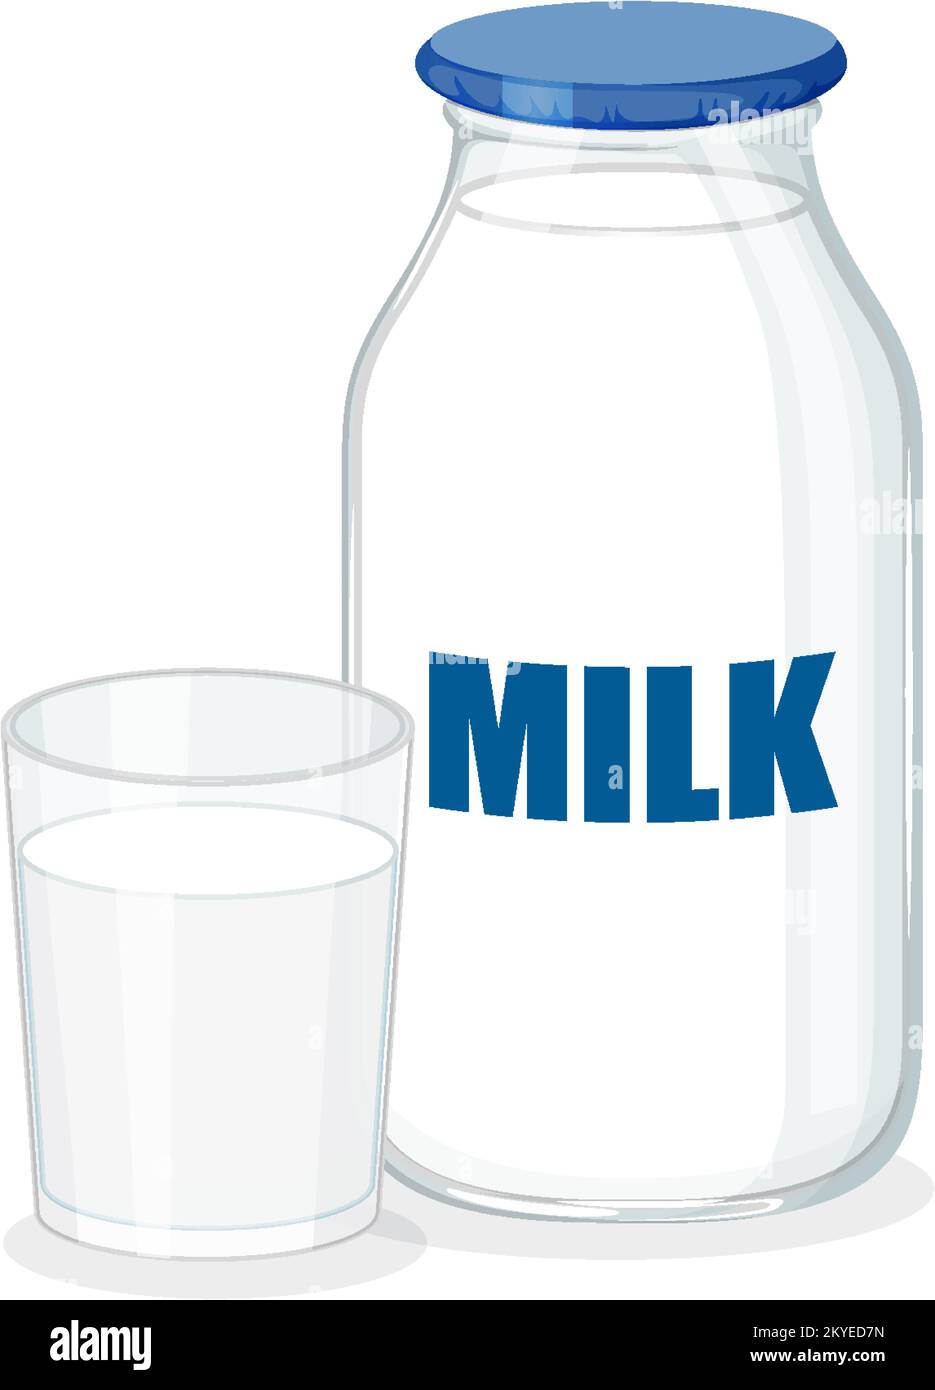 Milk bottle with a glass illustration Stock Vector